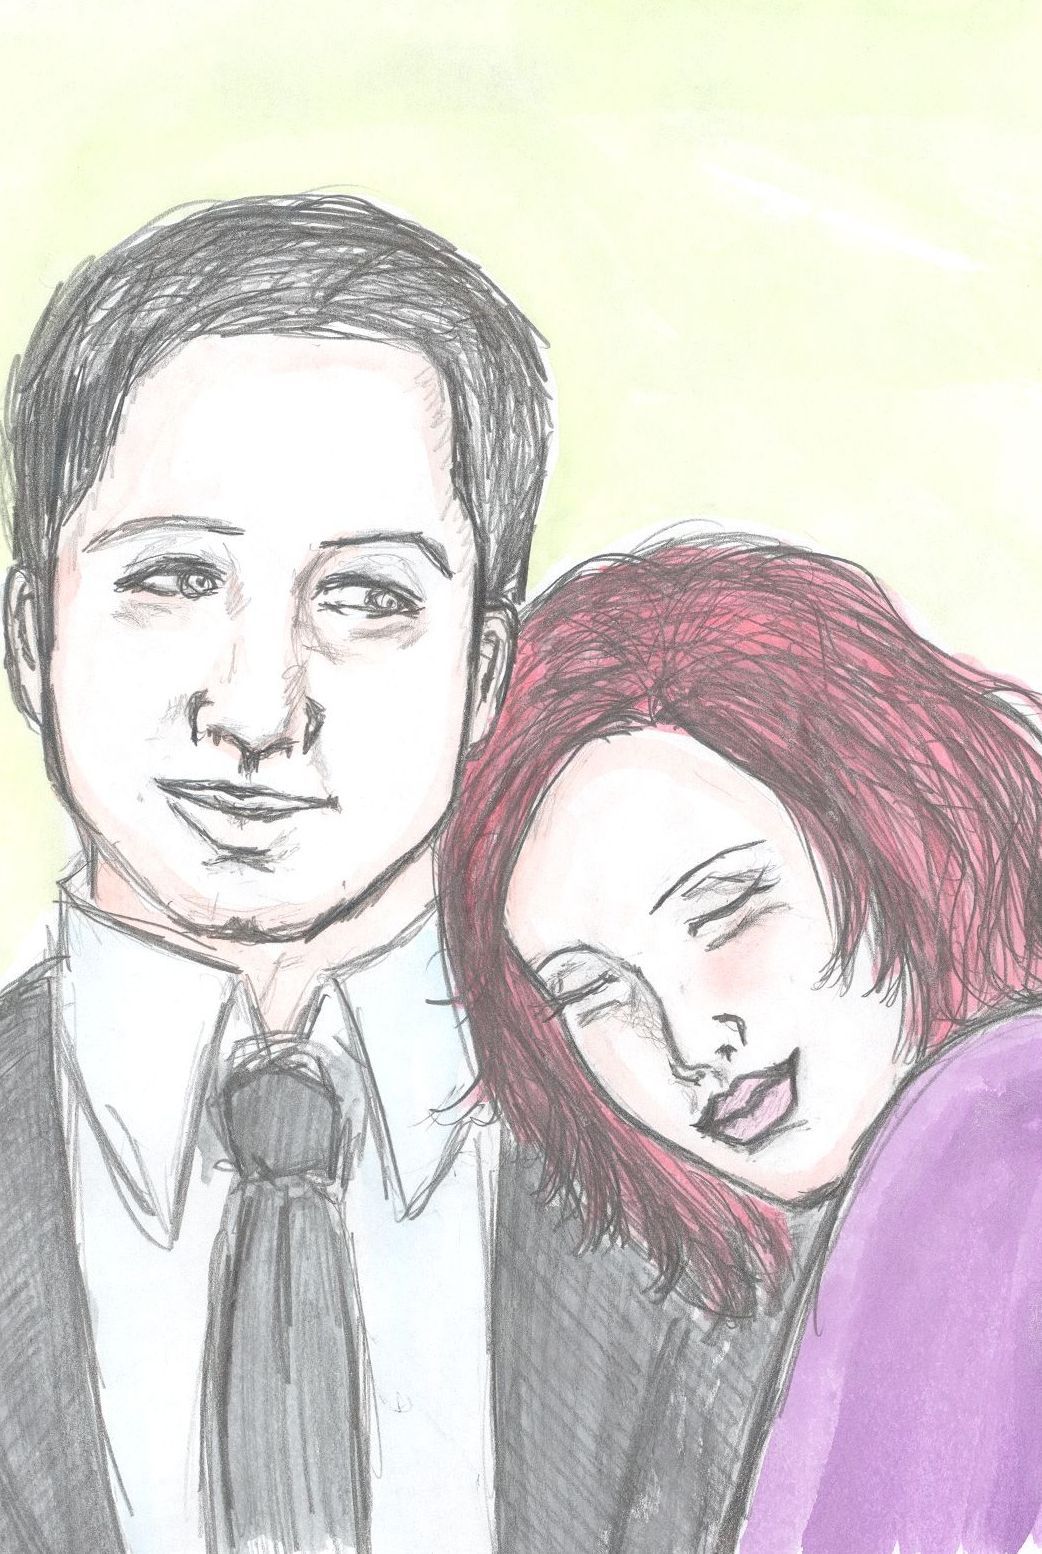 Mulder/scully by DannyH